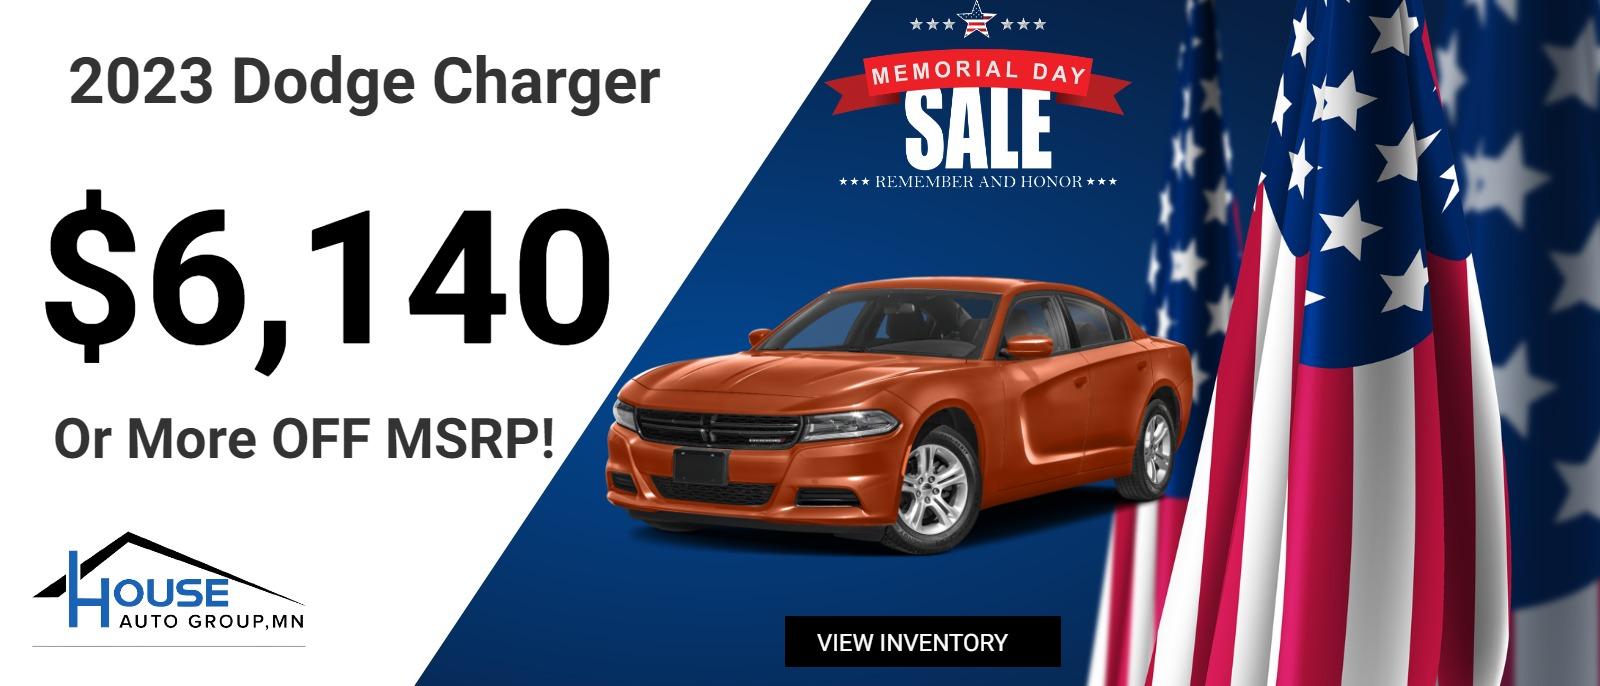 2023 Dodge Charger -- $6,140 Or More Off MSRP!